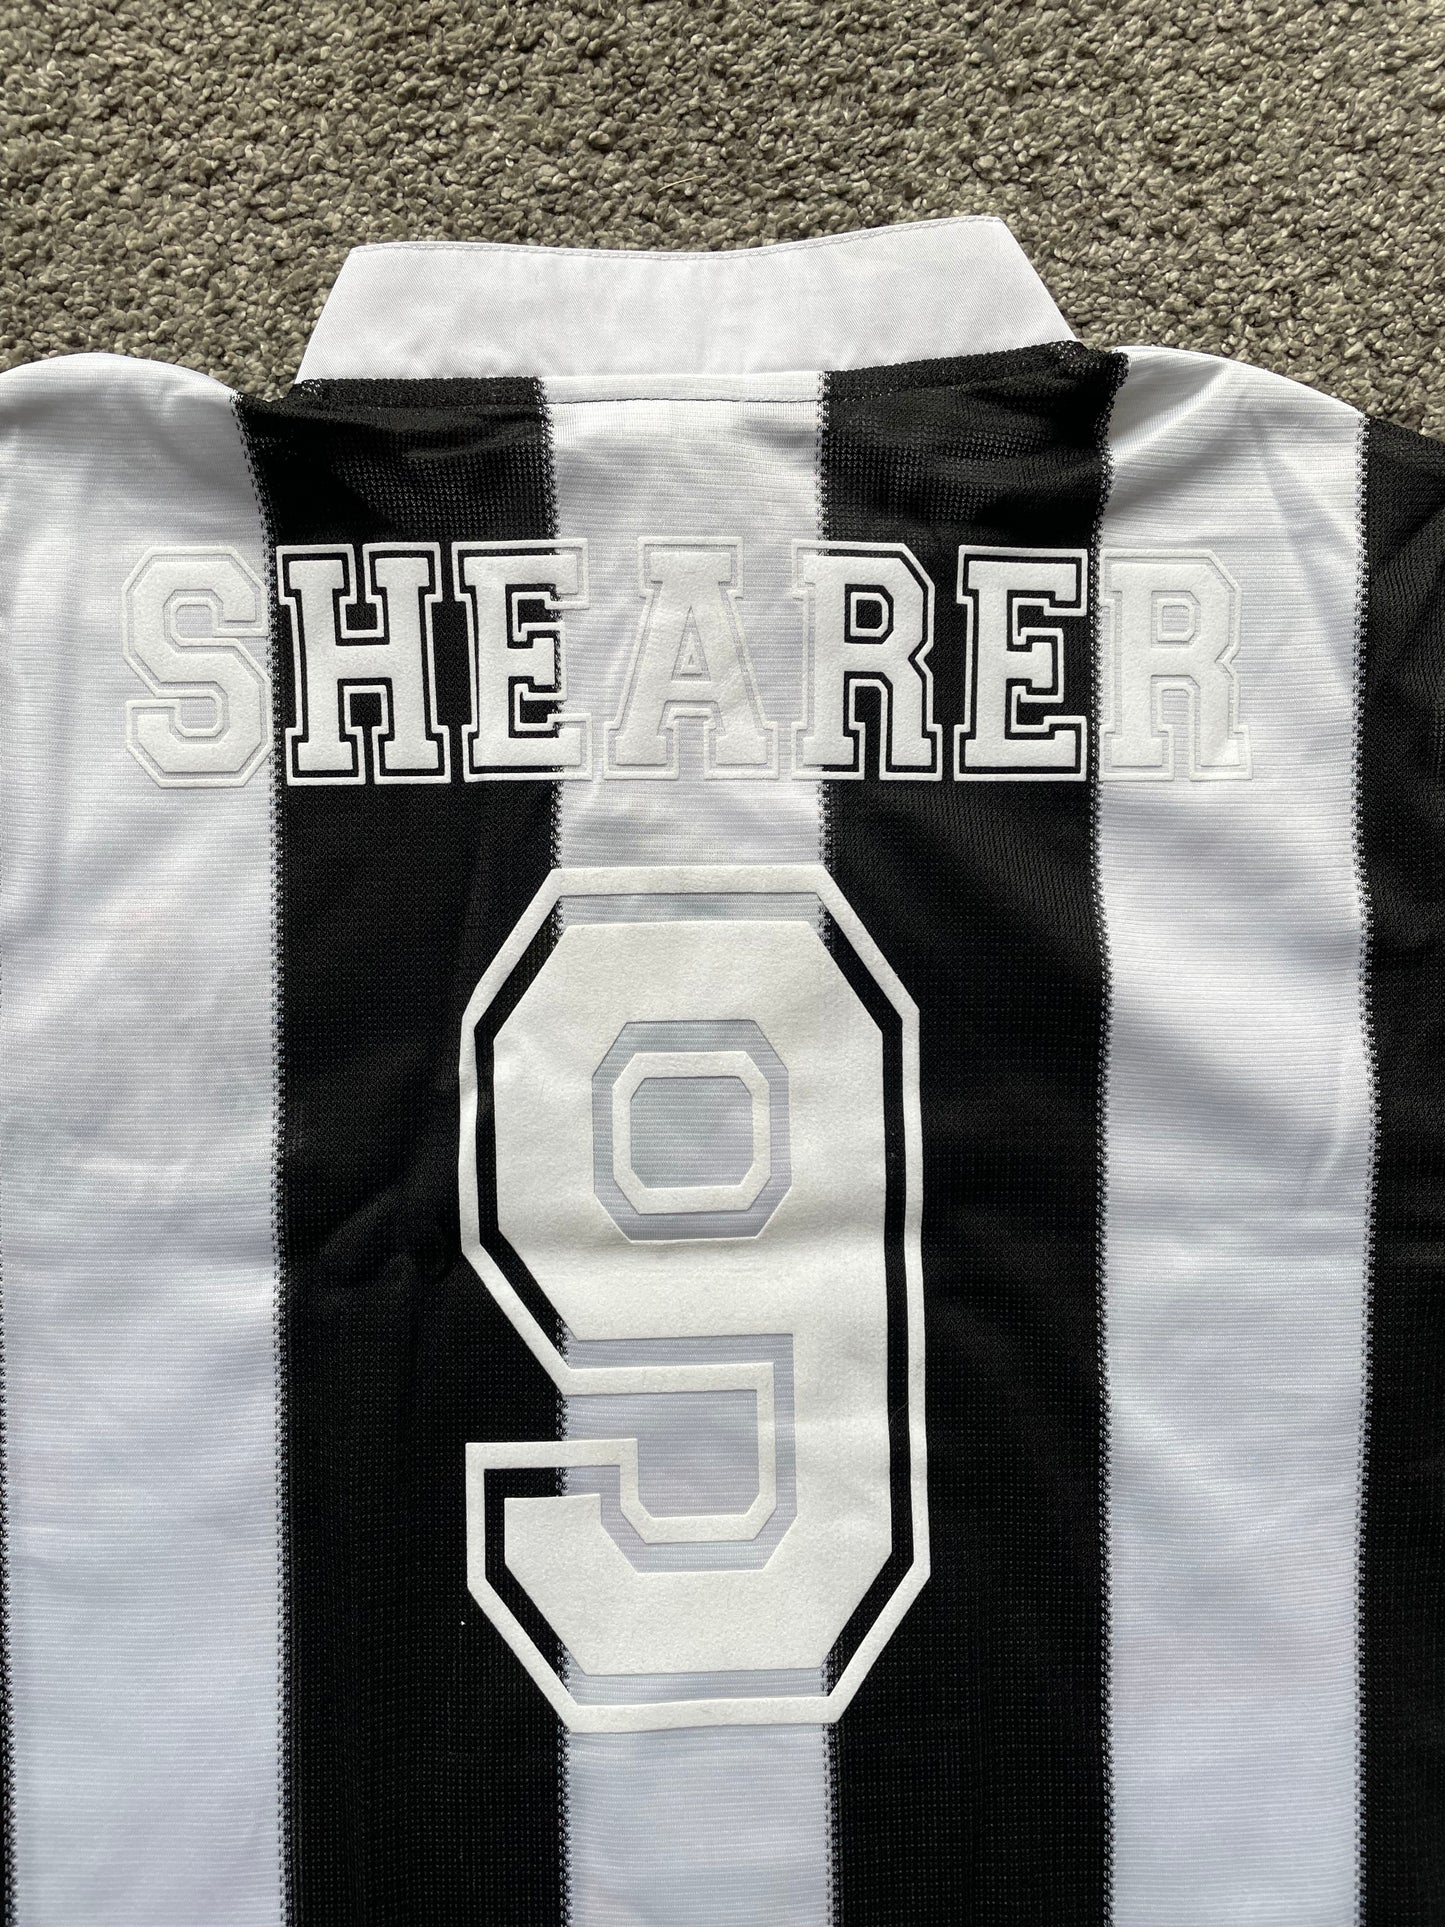 Newcastle 1995 Home Shirt SHEARER 9 (excellent) Adults Large BNWT